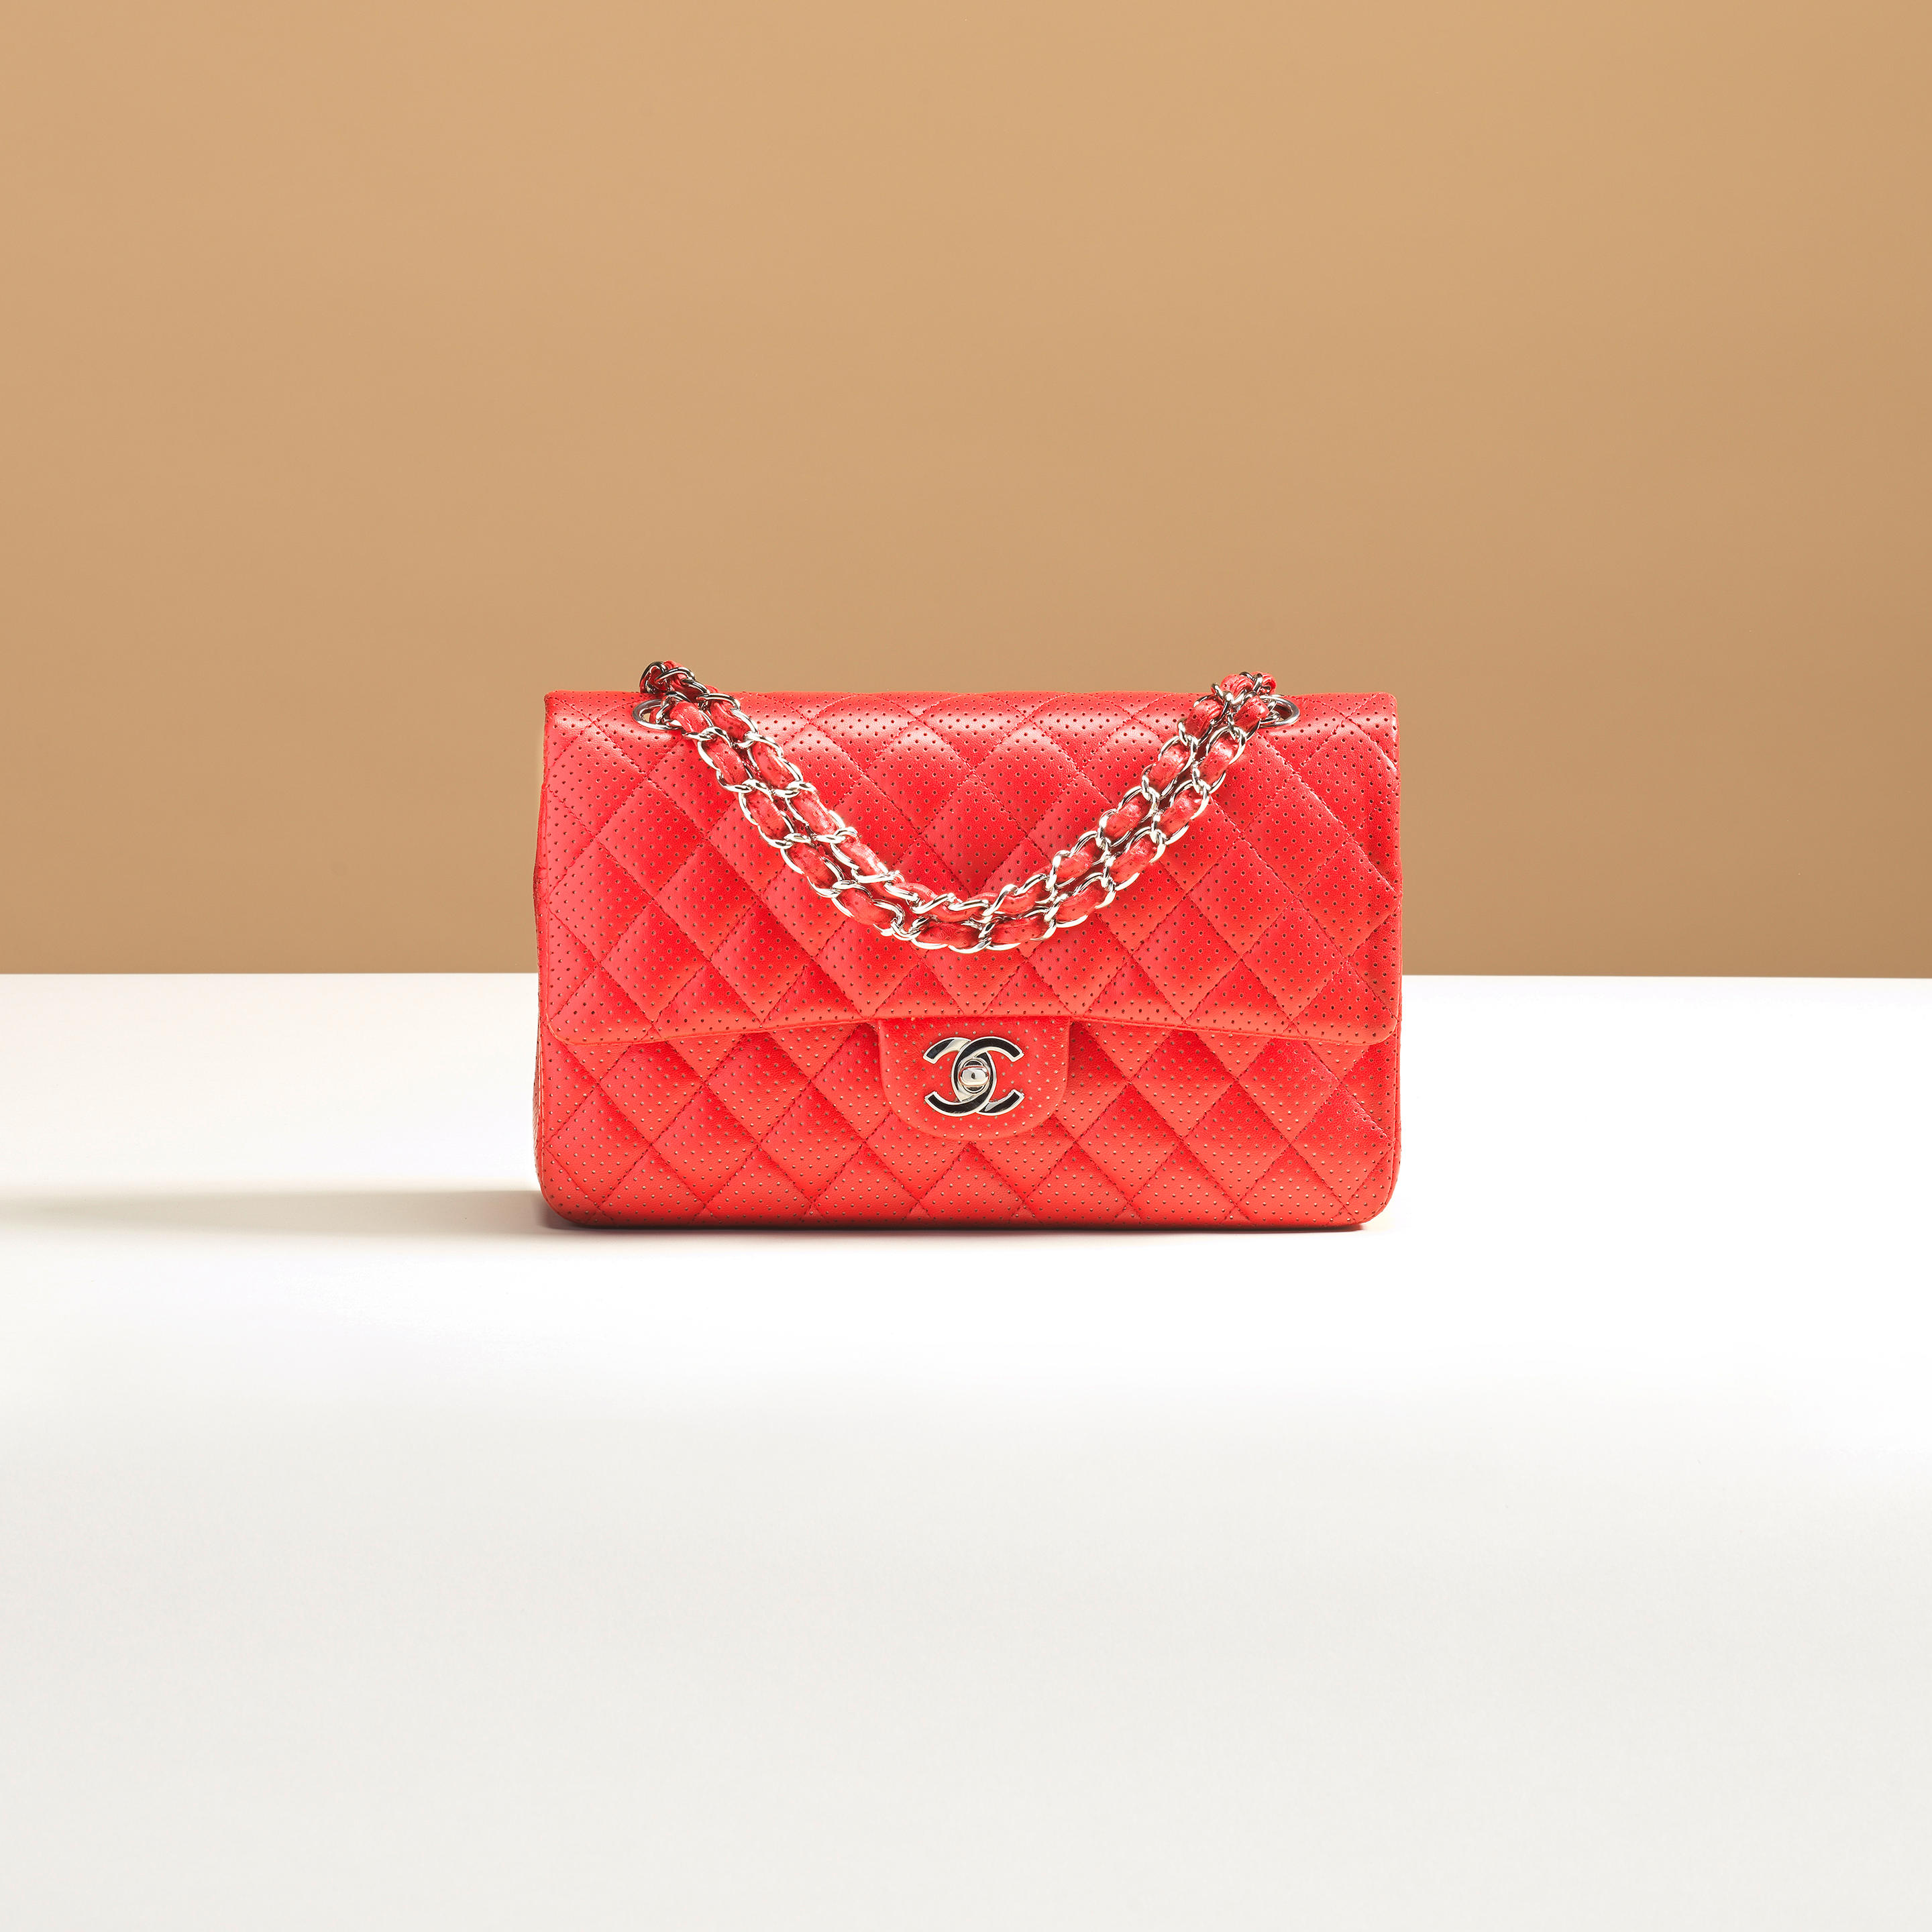 Chanel a Red Perforated Lambskin Medium Classic Double Flap Bag 2006-08  (includes serial sticker, authenticity card, dust bag and box) - Bonhams